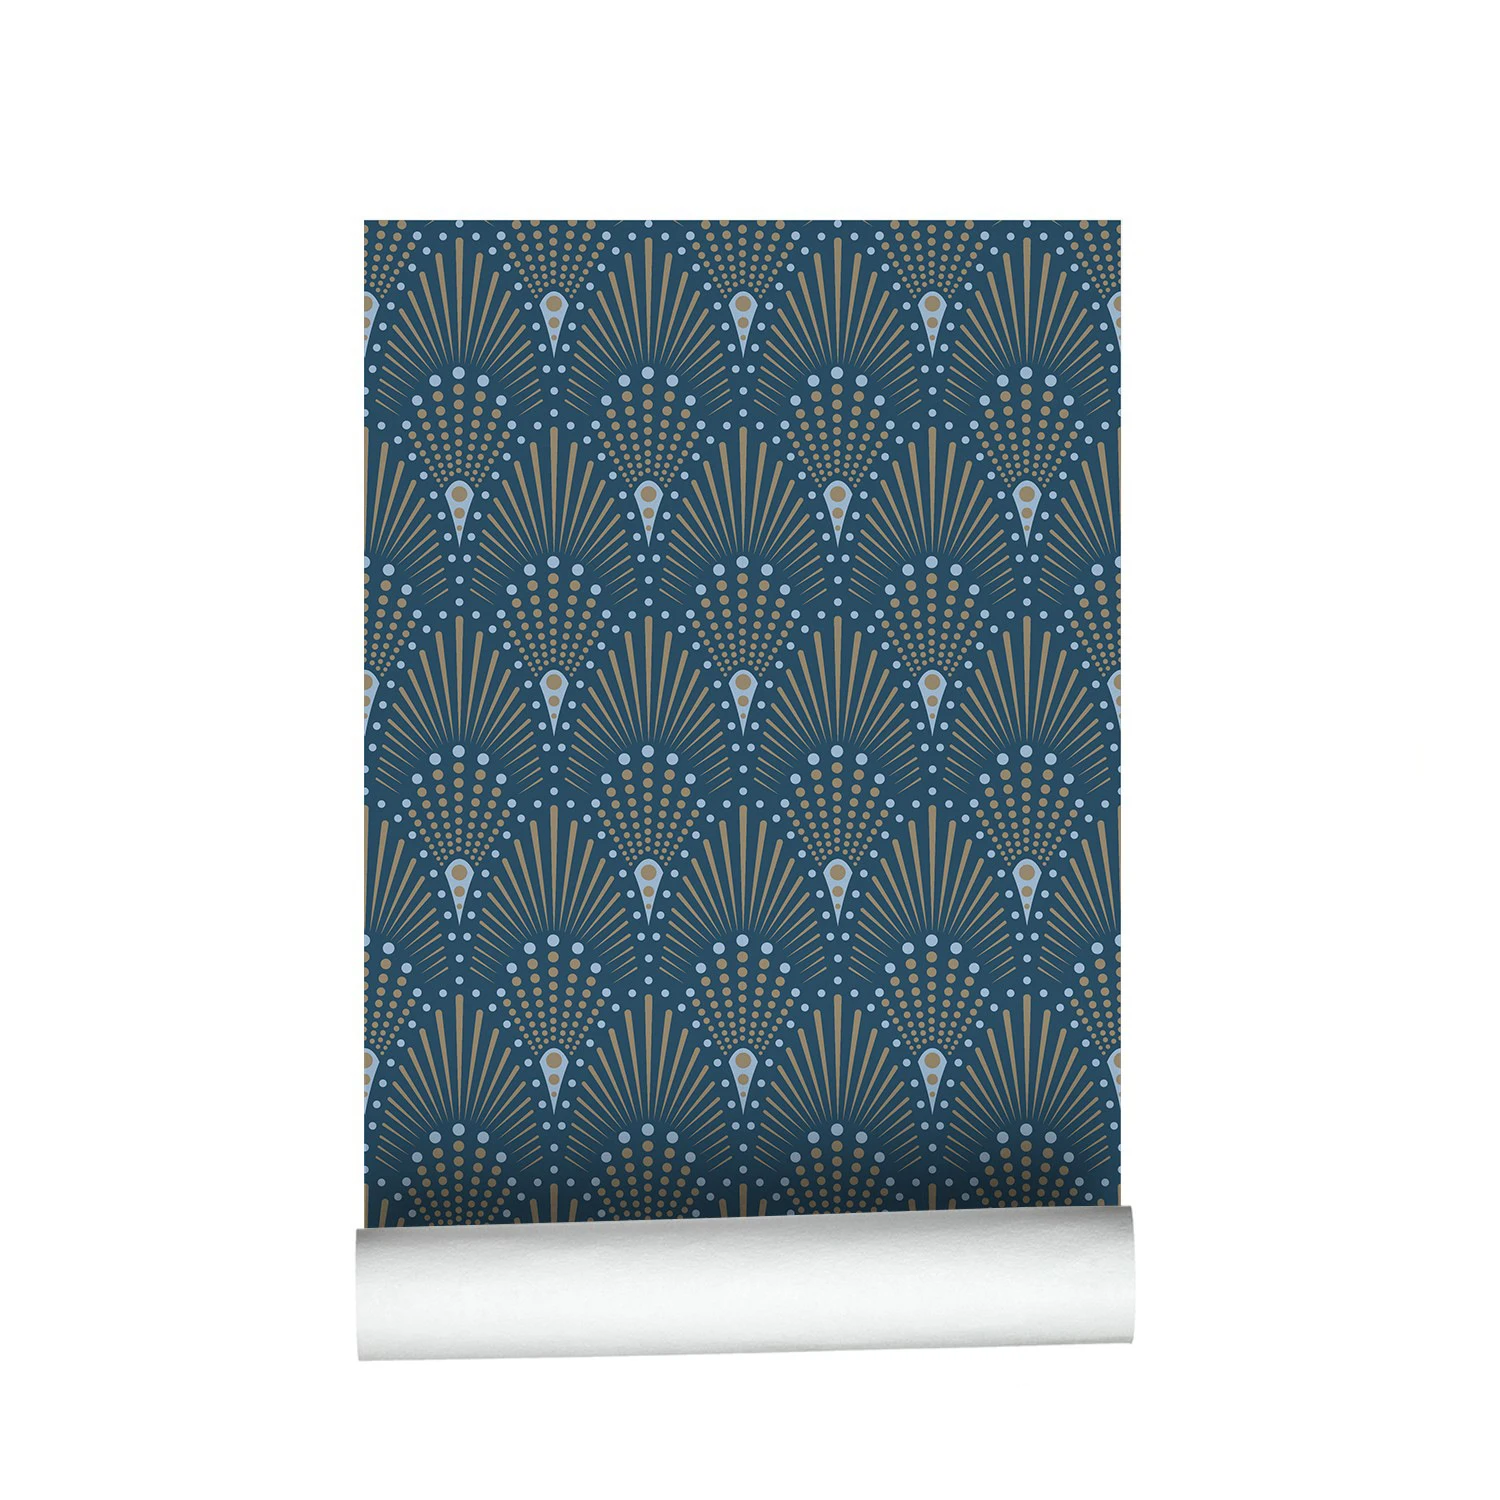 Dark Blue Geometric Self Adhesive Wallpaper Modern Nordic Solid Color Peel and Stick Wall Paper Removable Contact Paper